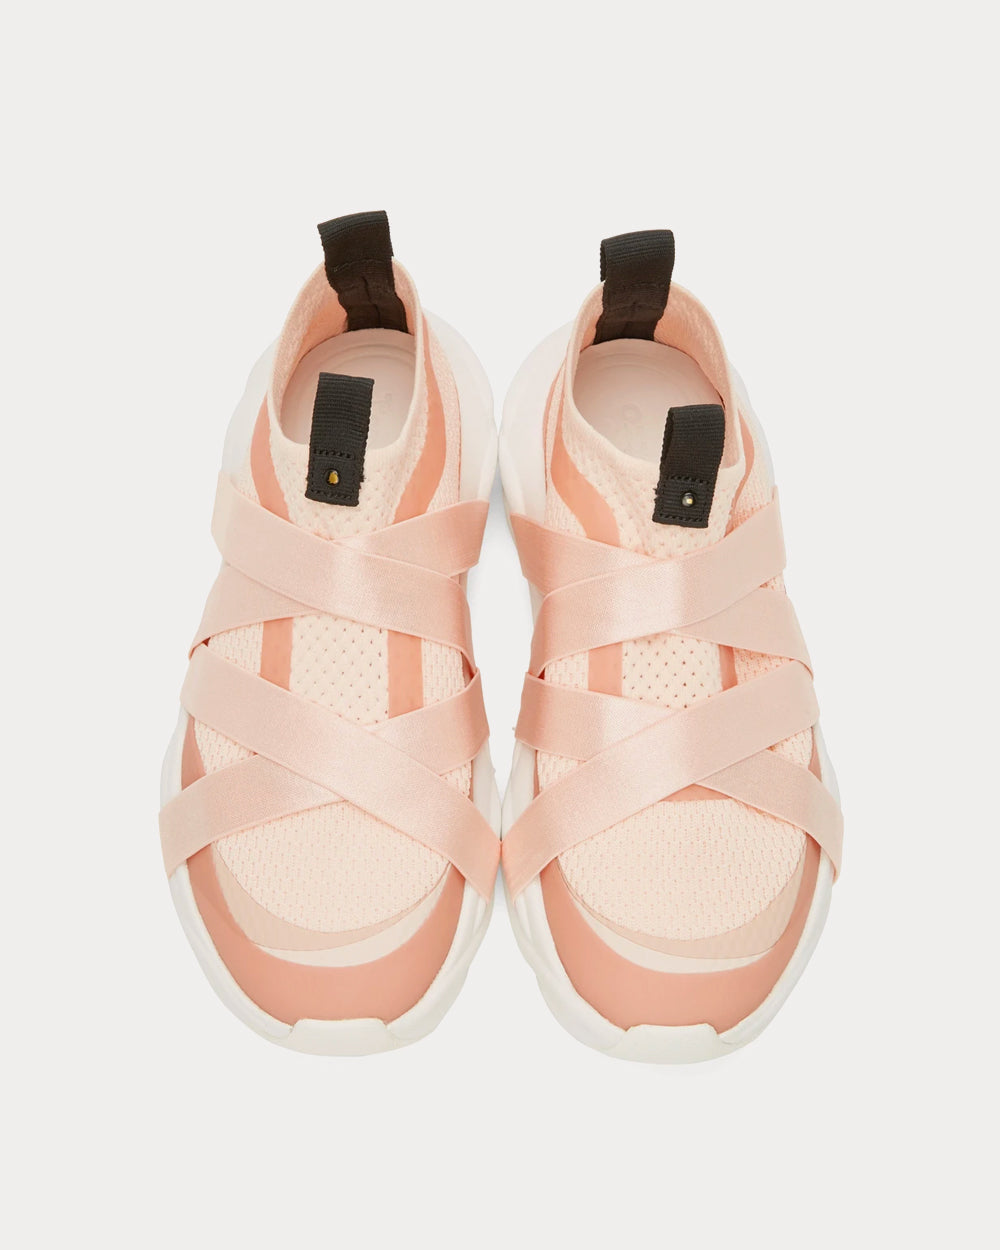 Repetto - Ruban Pink Low Top Sneakers